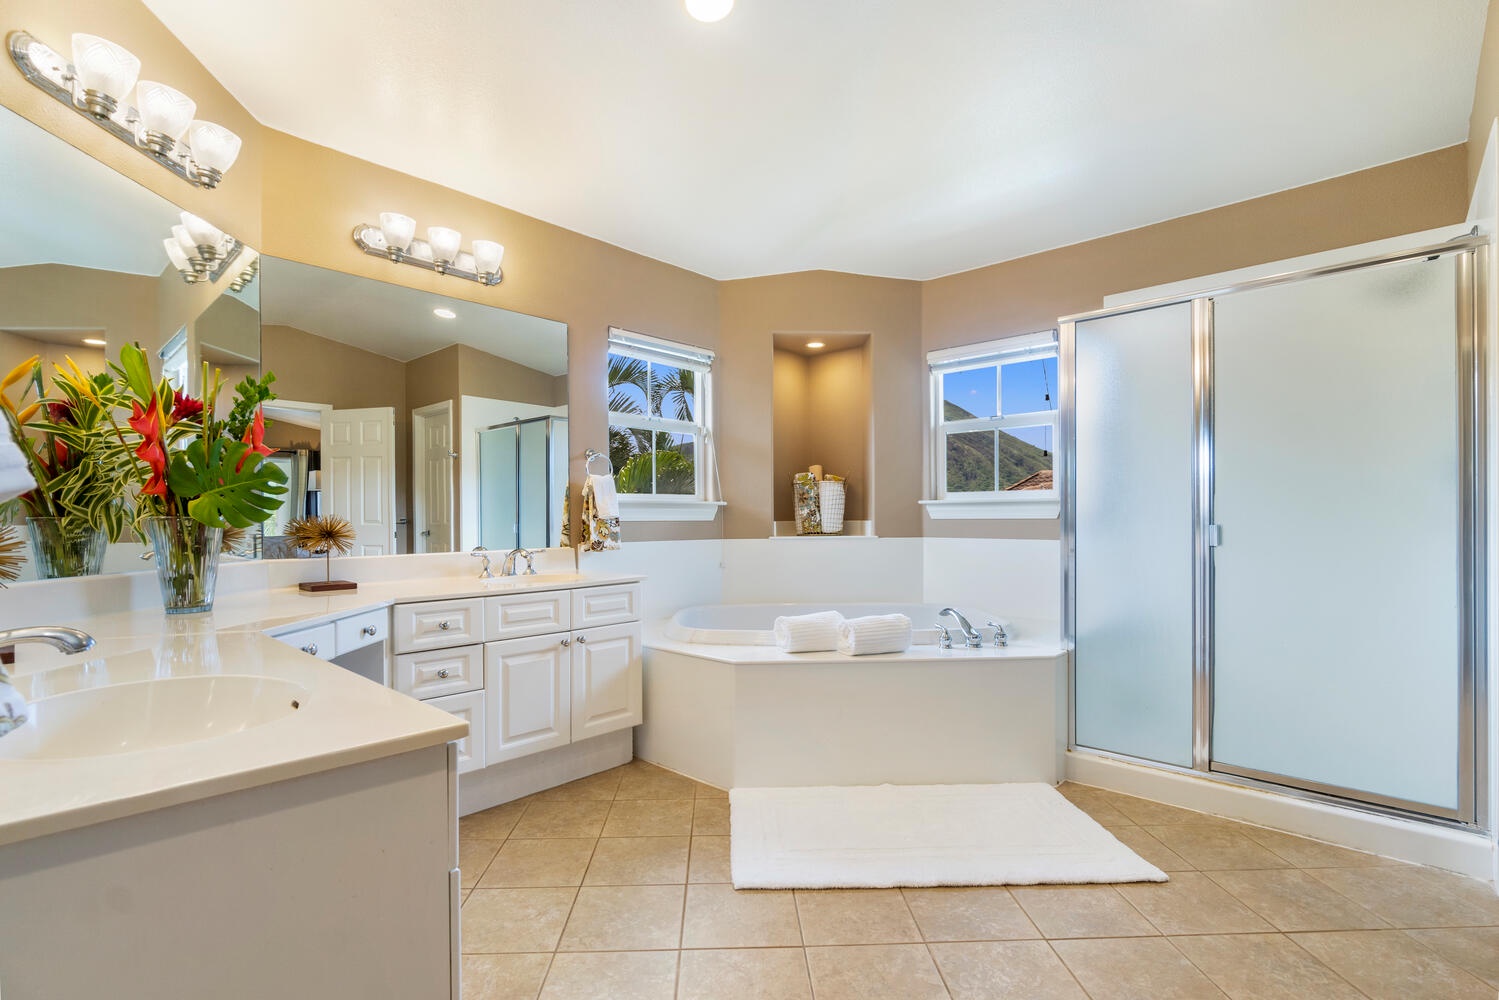 Honolulu Vacation Rentals, Melemele Hale - Primary Ensuite with tub and separate shower